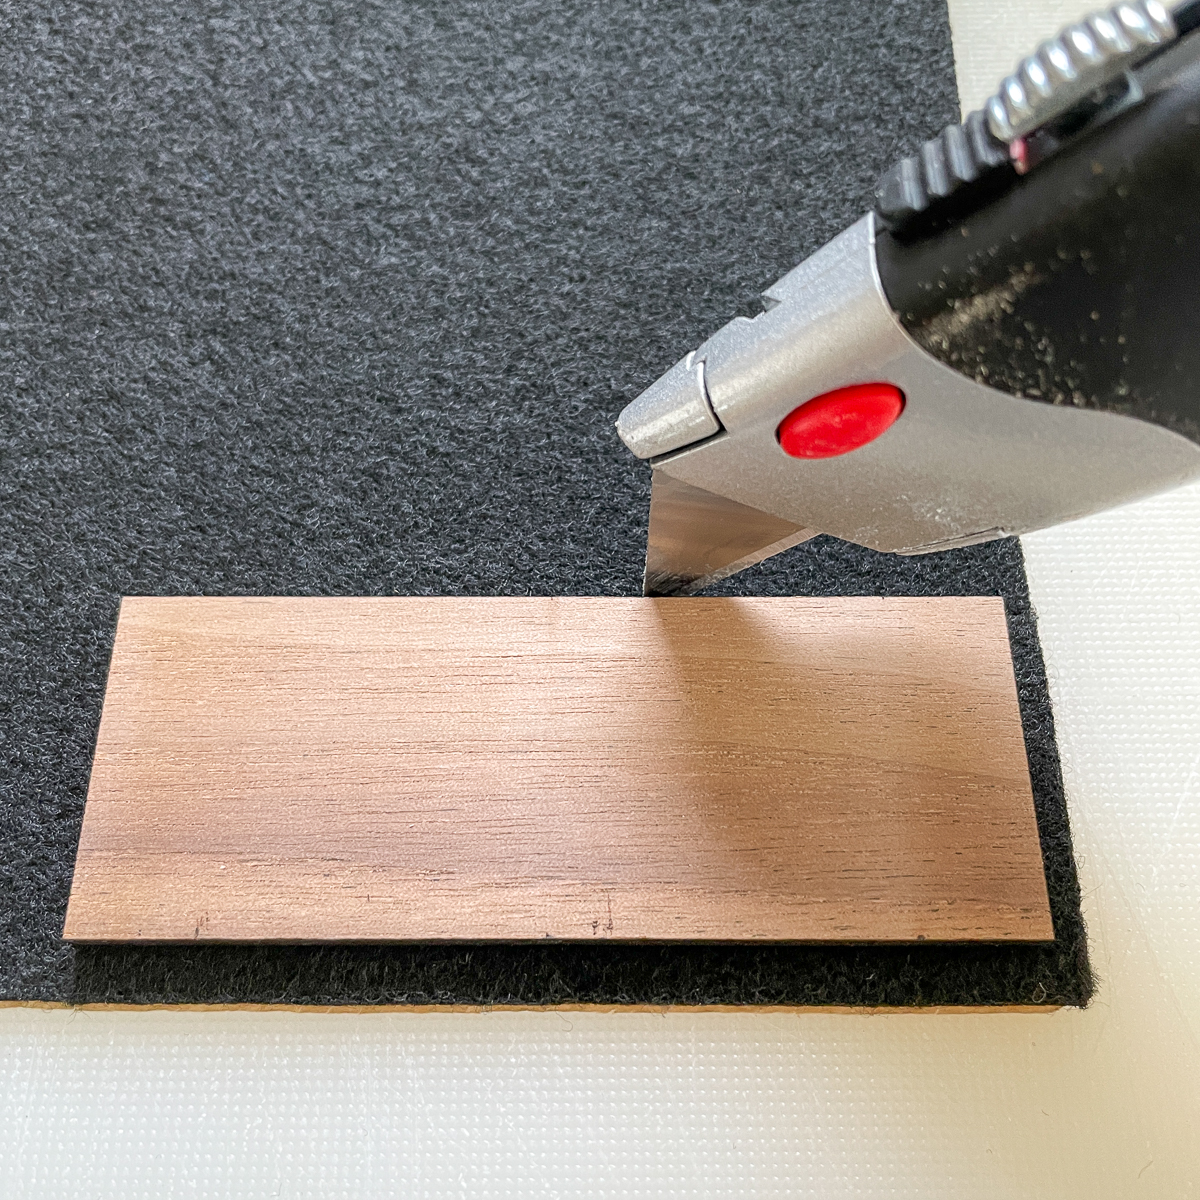 cutting out felt for DIY dice box lid with a utility knife